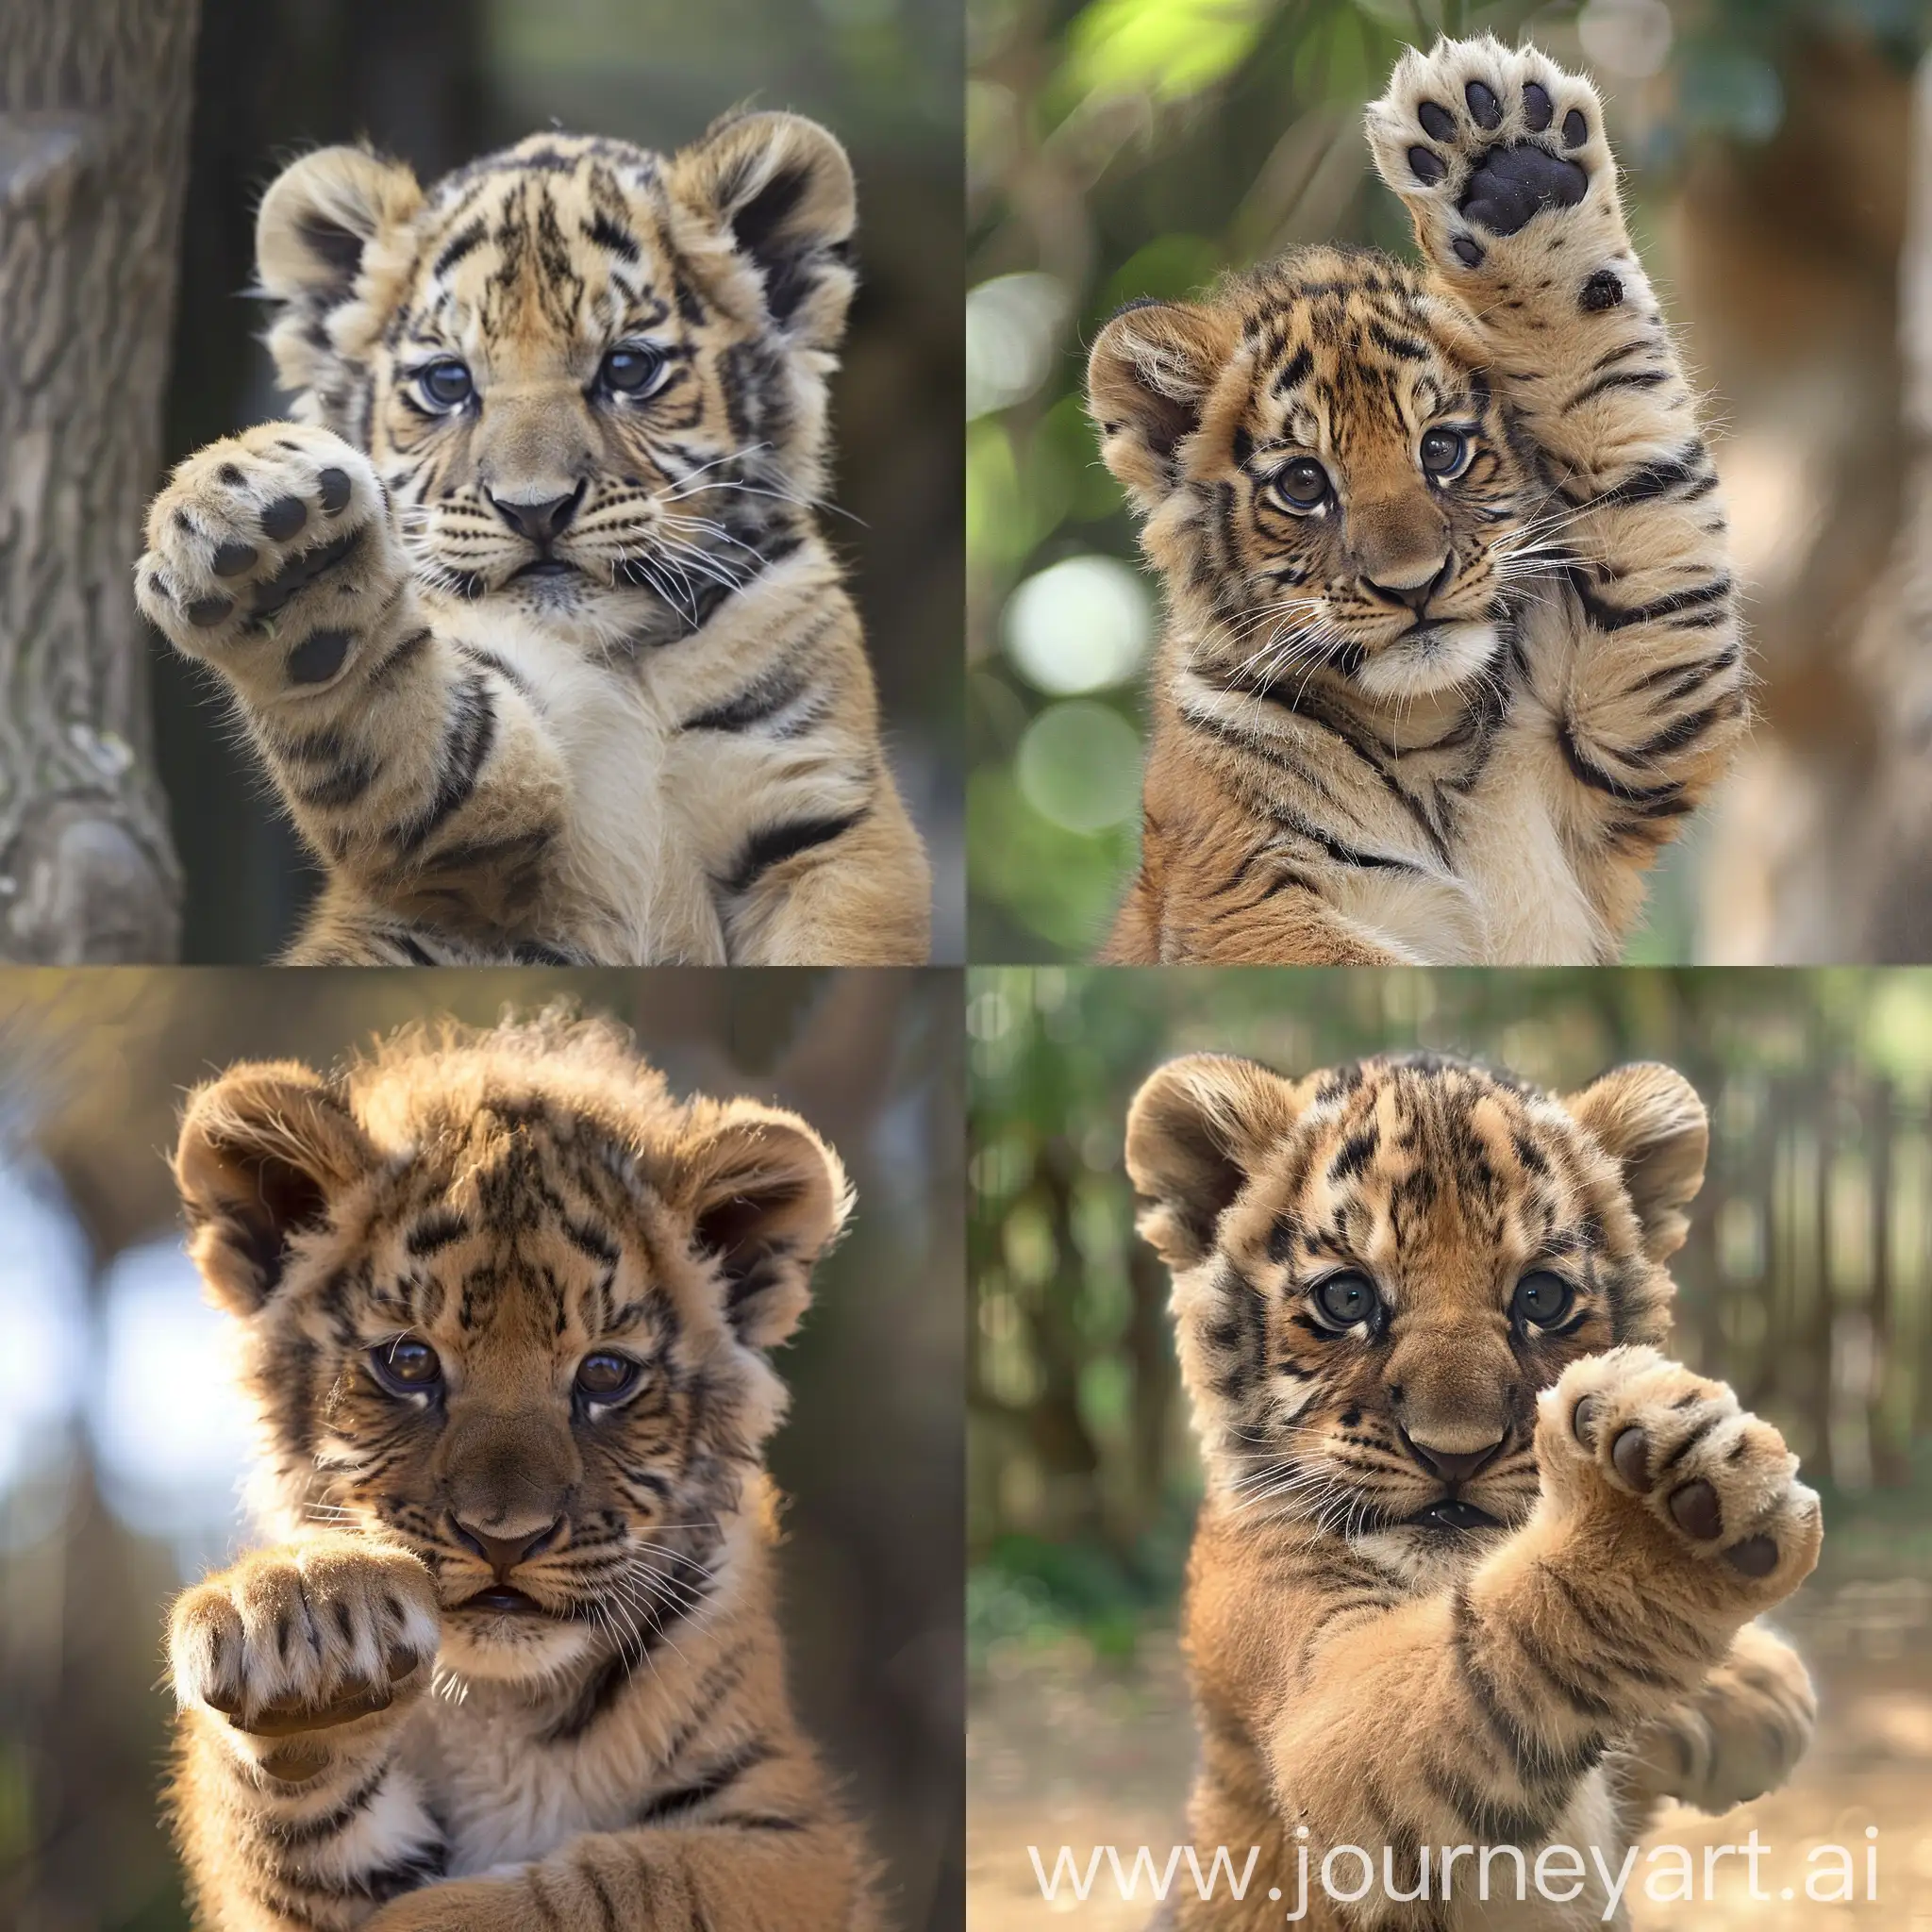 A young cub's fist is a symbol of budding strength and playfulness. Picture a lion or tiger cub, their tiny paw curled into a soft fist, perhaps raised in a playful gesture or ready to engage in some innocent roughhousing with their siblings. It's a charming sight that embodies the curiosity and energy of youth, as well as the instinctual nature of their species. In that tiny fist lies the promise of future power and prowess, yet for now, it's just a playful expression of their youthful exuberance.
